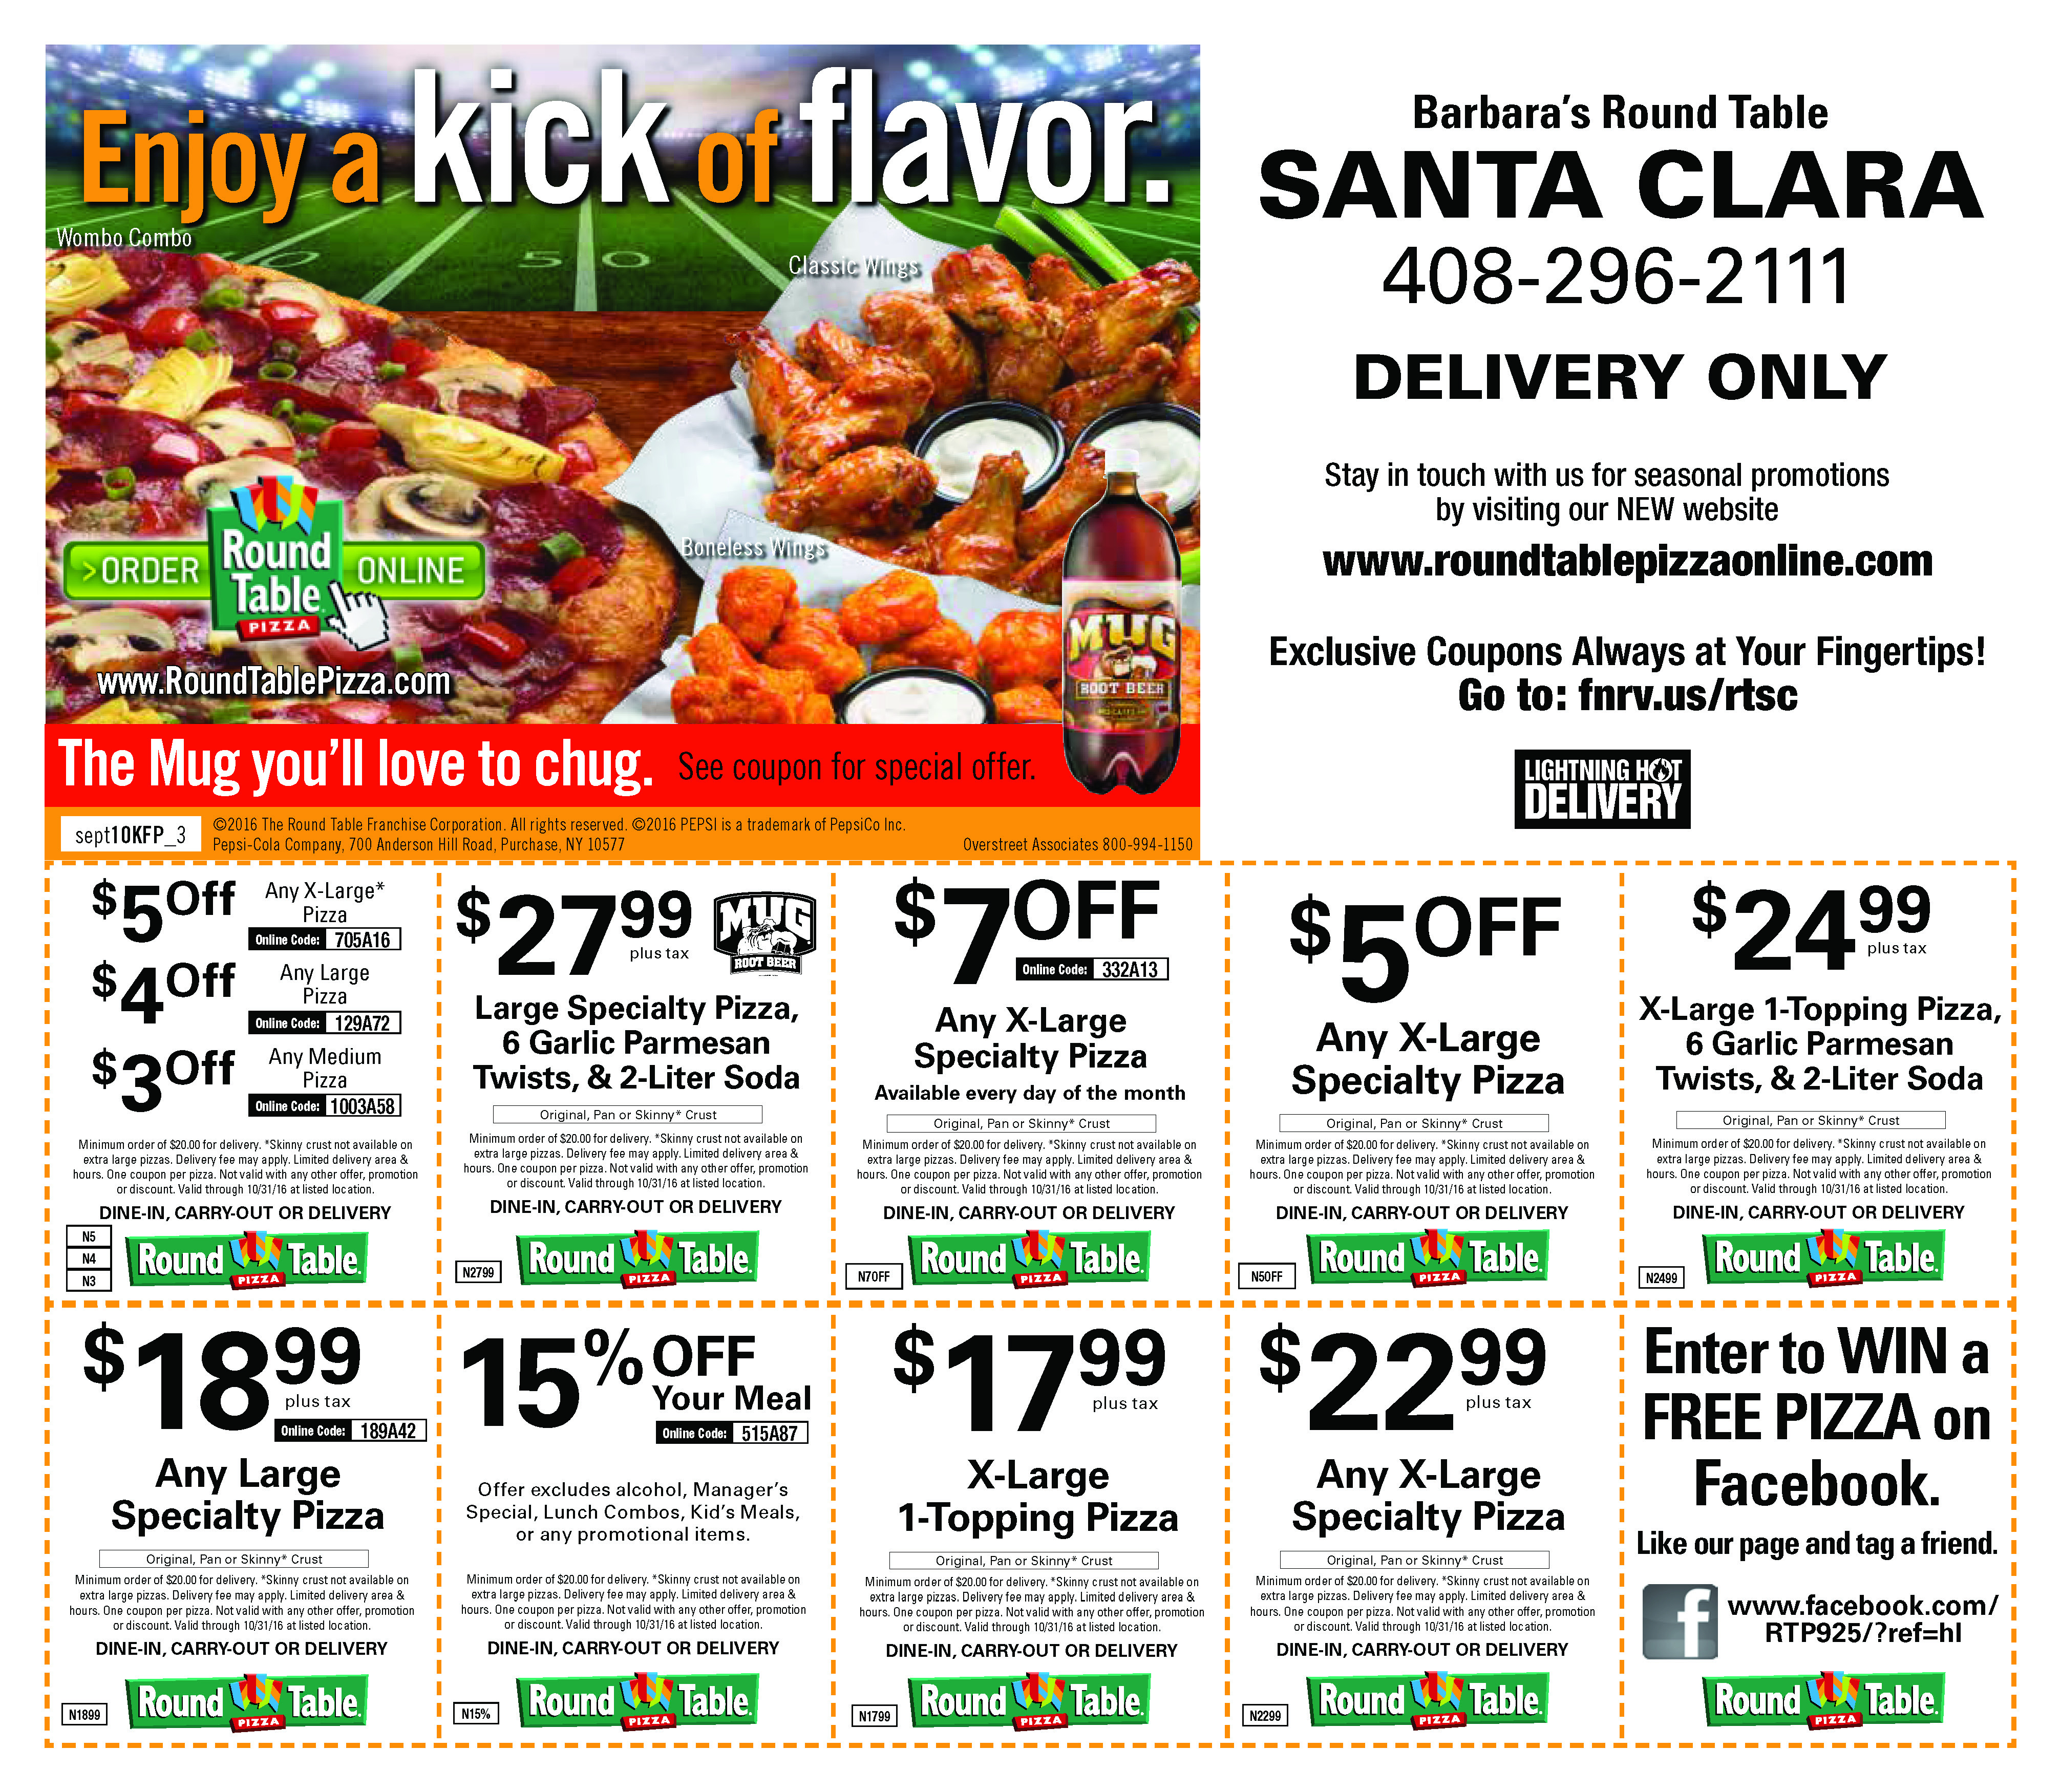 Round Table Coupon Online Order - Boundary Bathrooms Deals - Free Printable Round Table Pizza Coupons